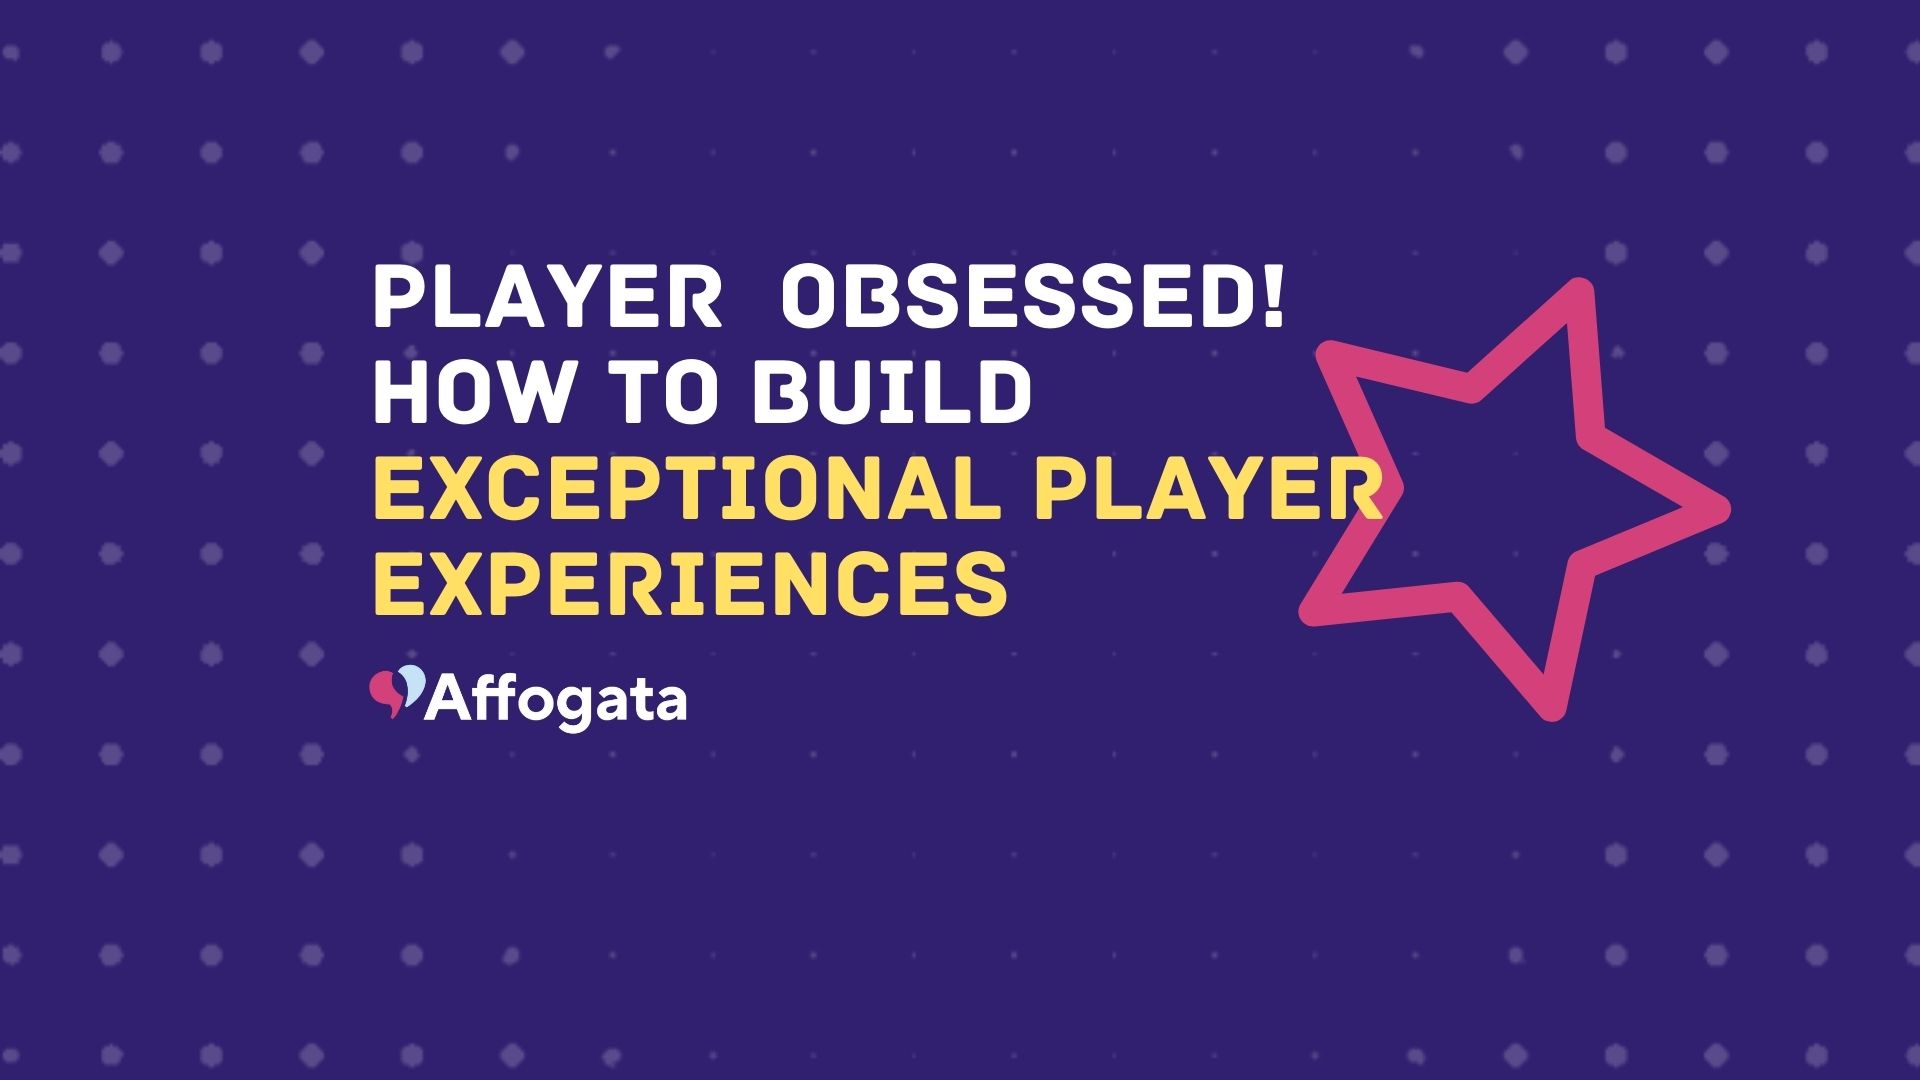 Player Obsessed! How to Build Exceptional Player Experiences and Affogata logo